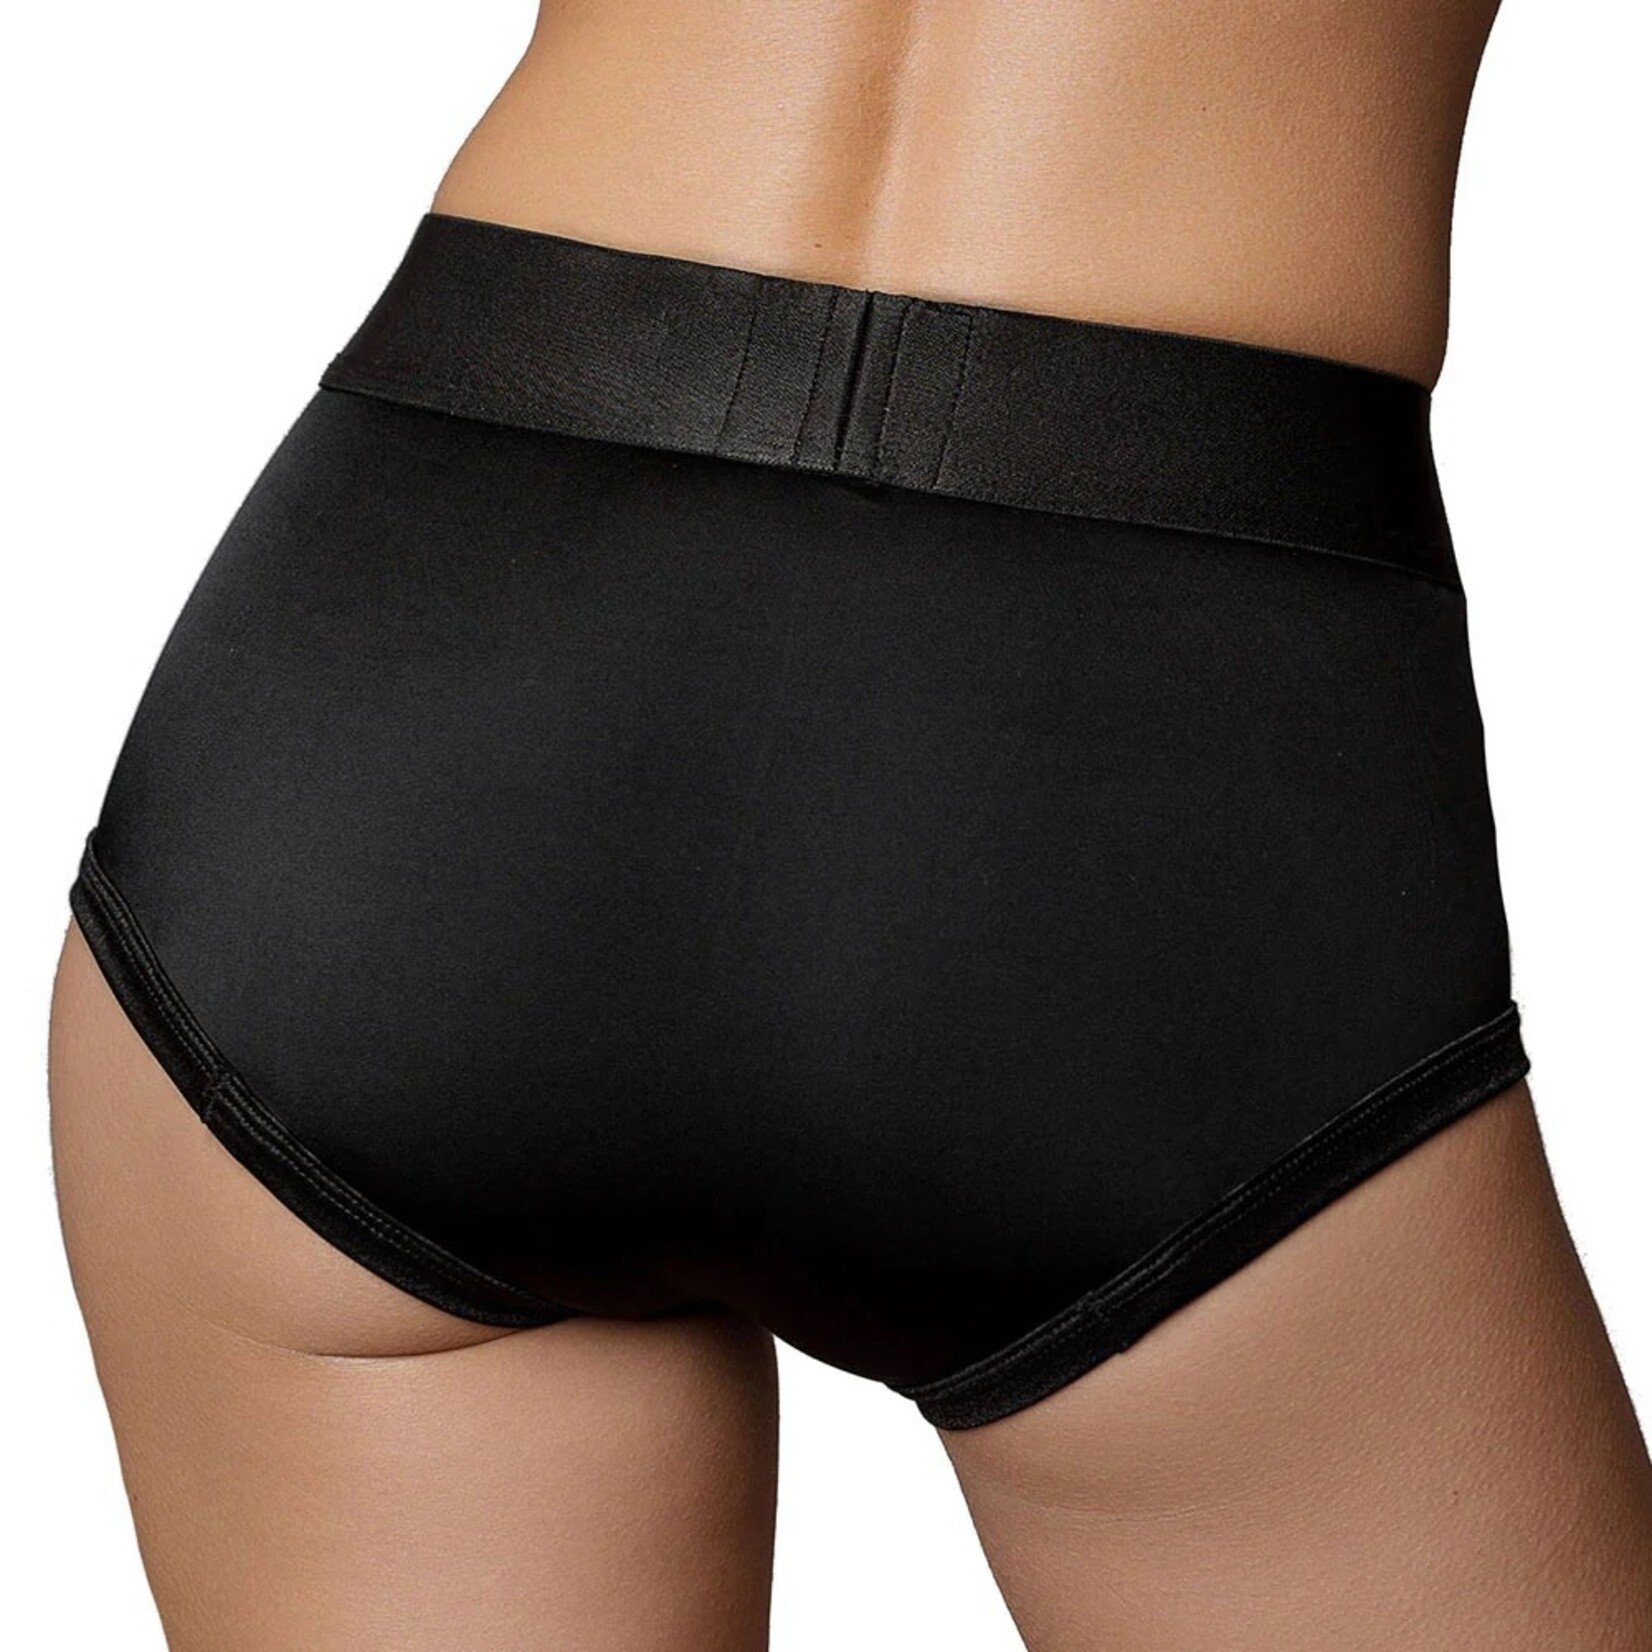 OUCH OUCH! BLACK VIBRATING STRAP-ON BRIEF XS/S